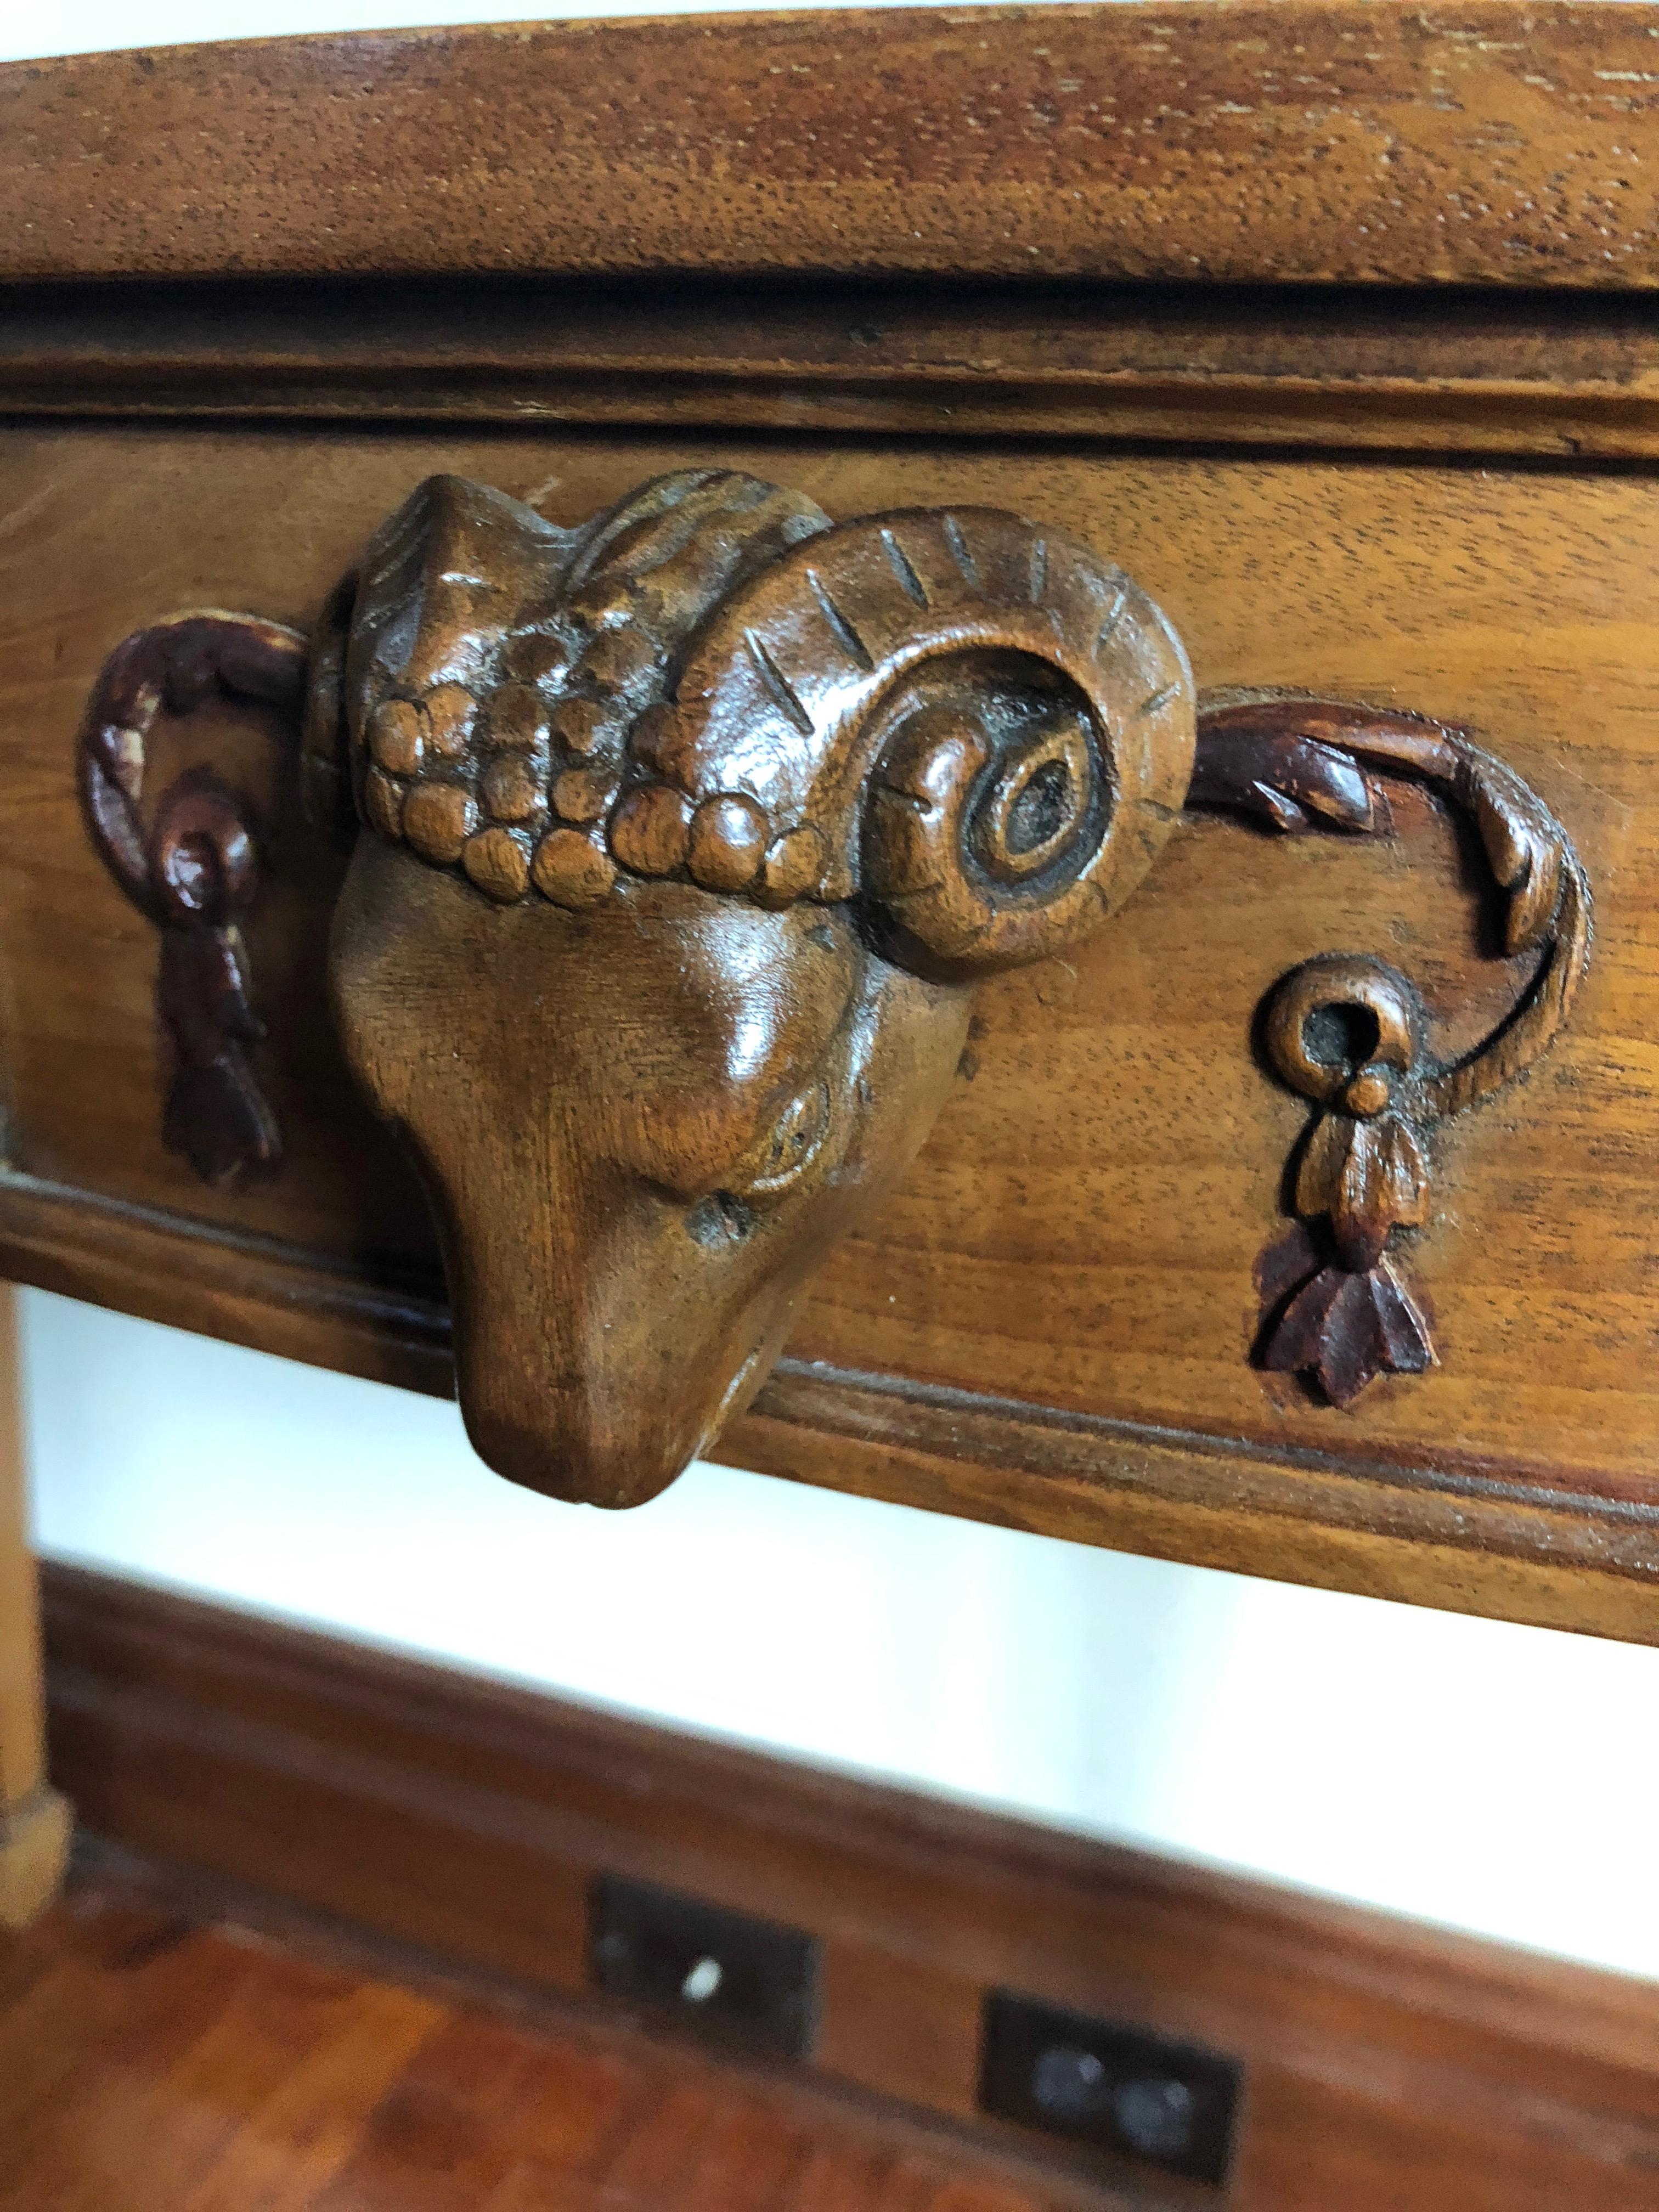 Stunning demilune console in a honey colored wood having carved ram's head on the center front and decorative swirls on the apron as well as carvings on the elegant tapered legs.

 